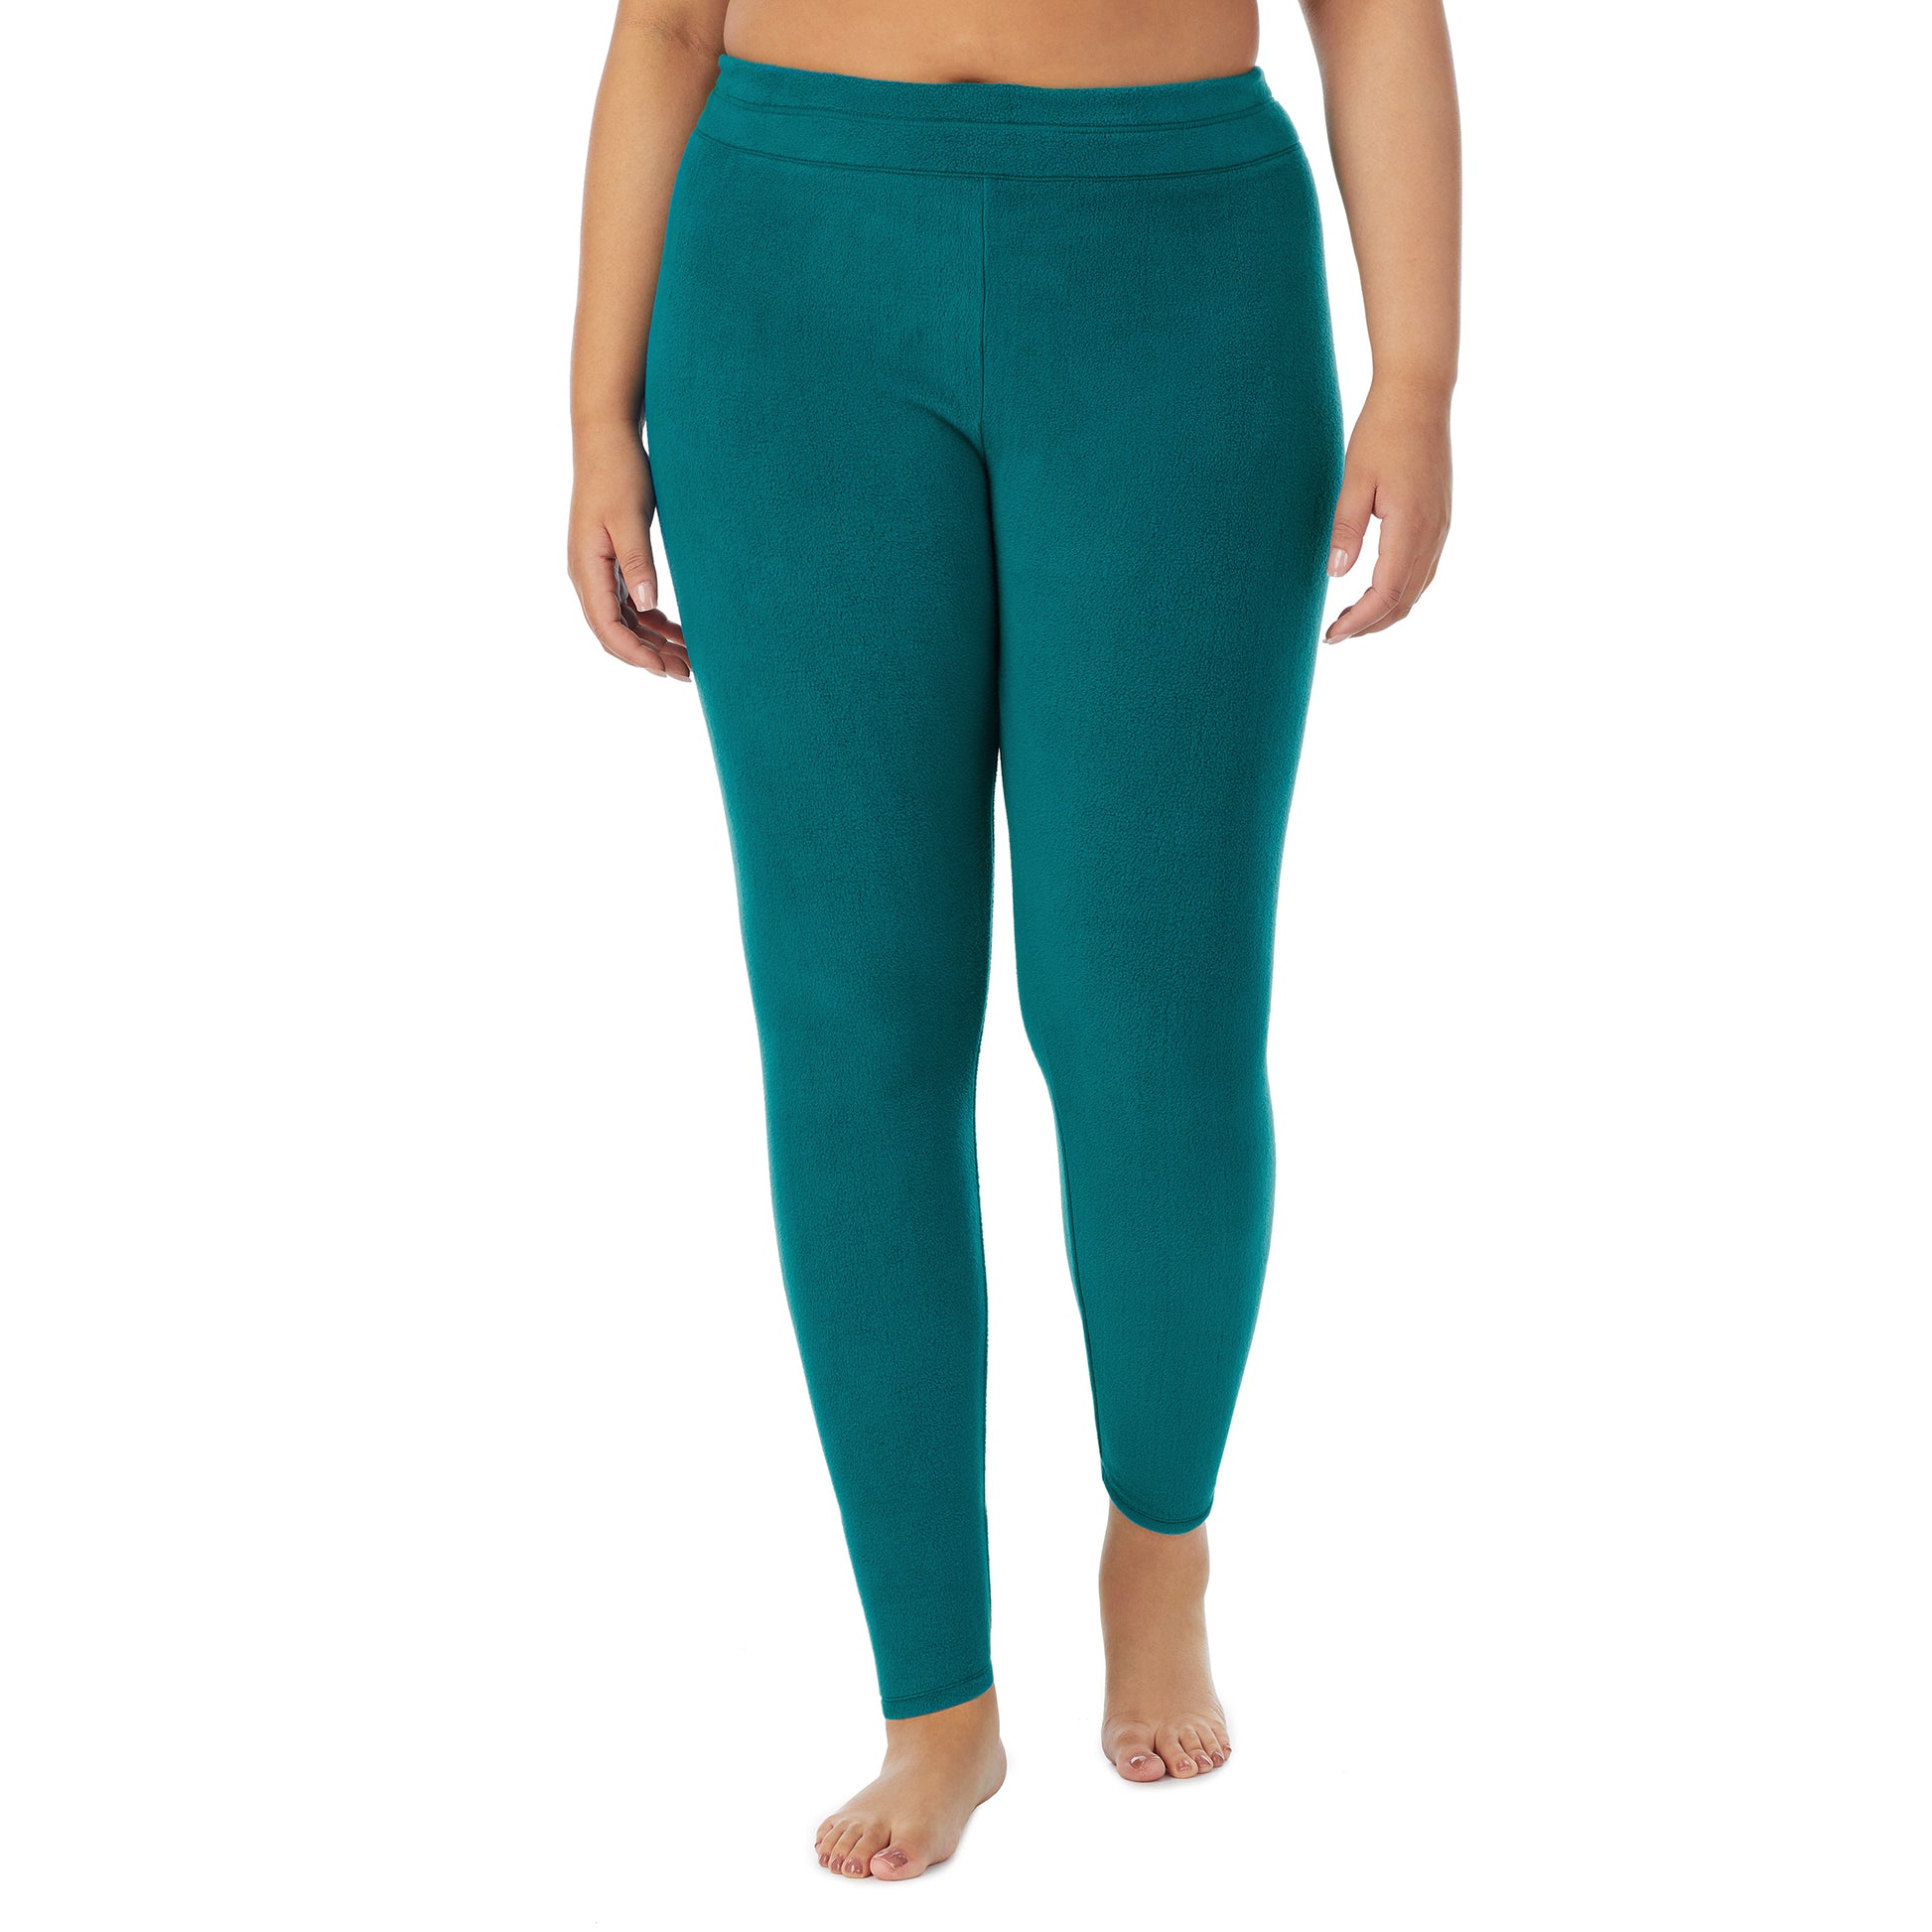 Teal Lagoon;Model is wearing size 1X. She is 5’11”, Bust 36”, Waist 36.5”, Hips 47.5”.@A lady wearing teal lagoon fleecewear with stretch legging plus.